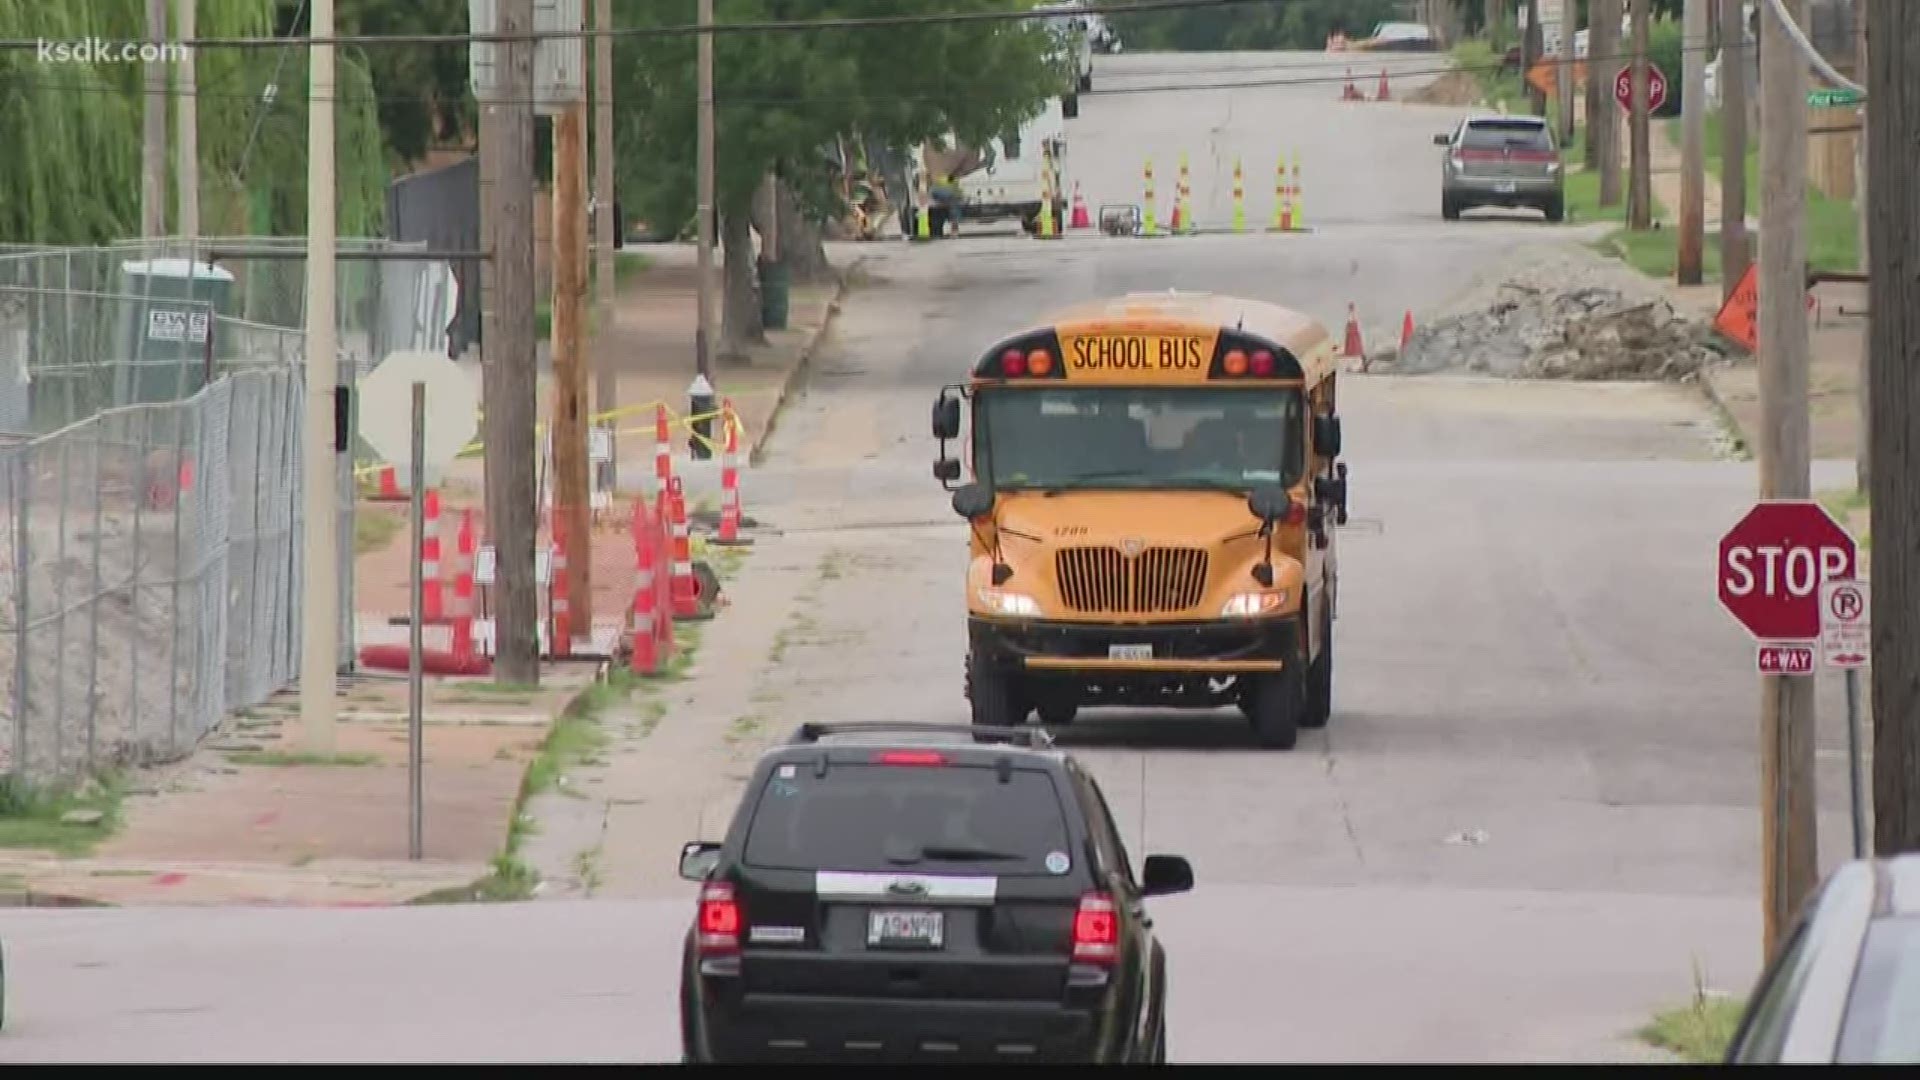 Parents say they panicked at the bus stop Friday when they realized their kids' bus from Kipp Wisdom Academy was hours late and no one could tell them where it was.